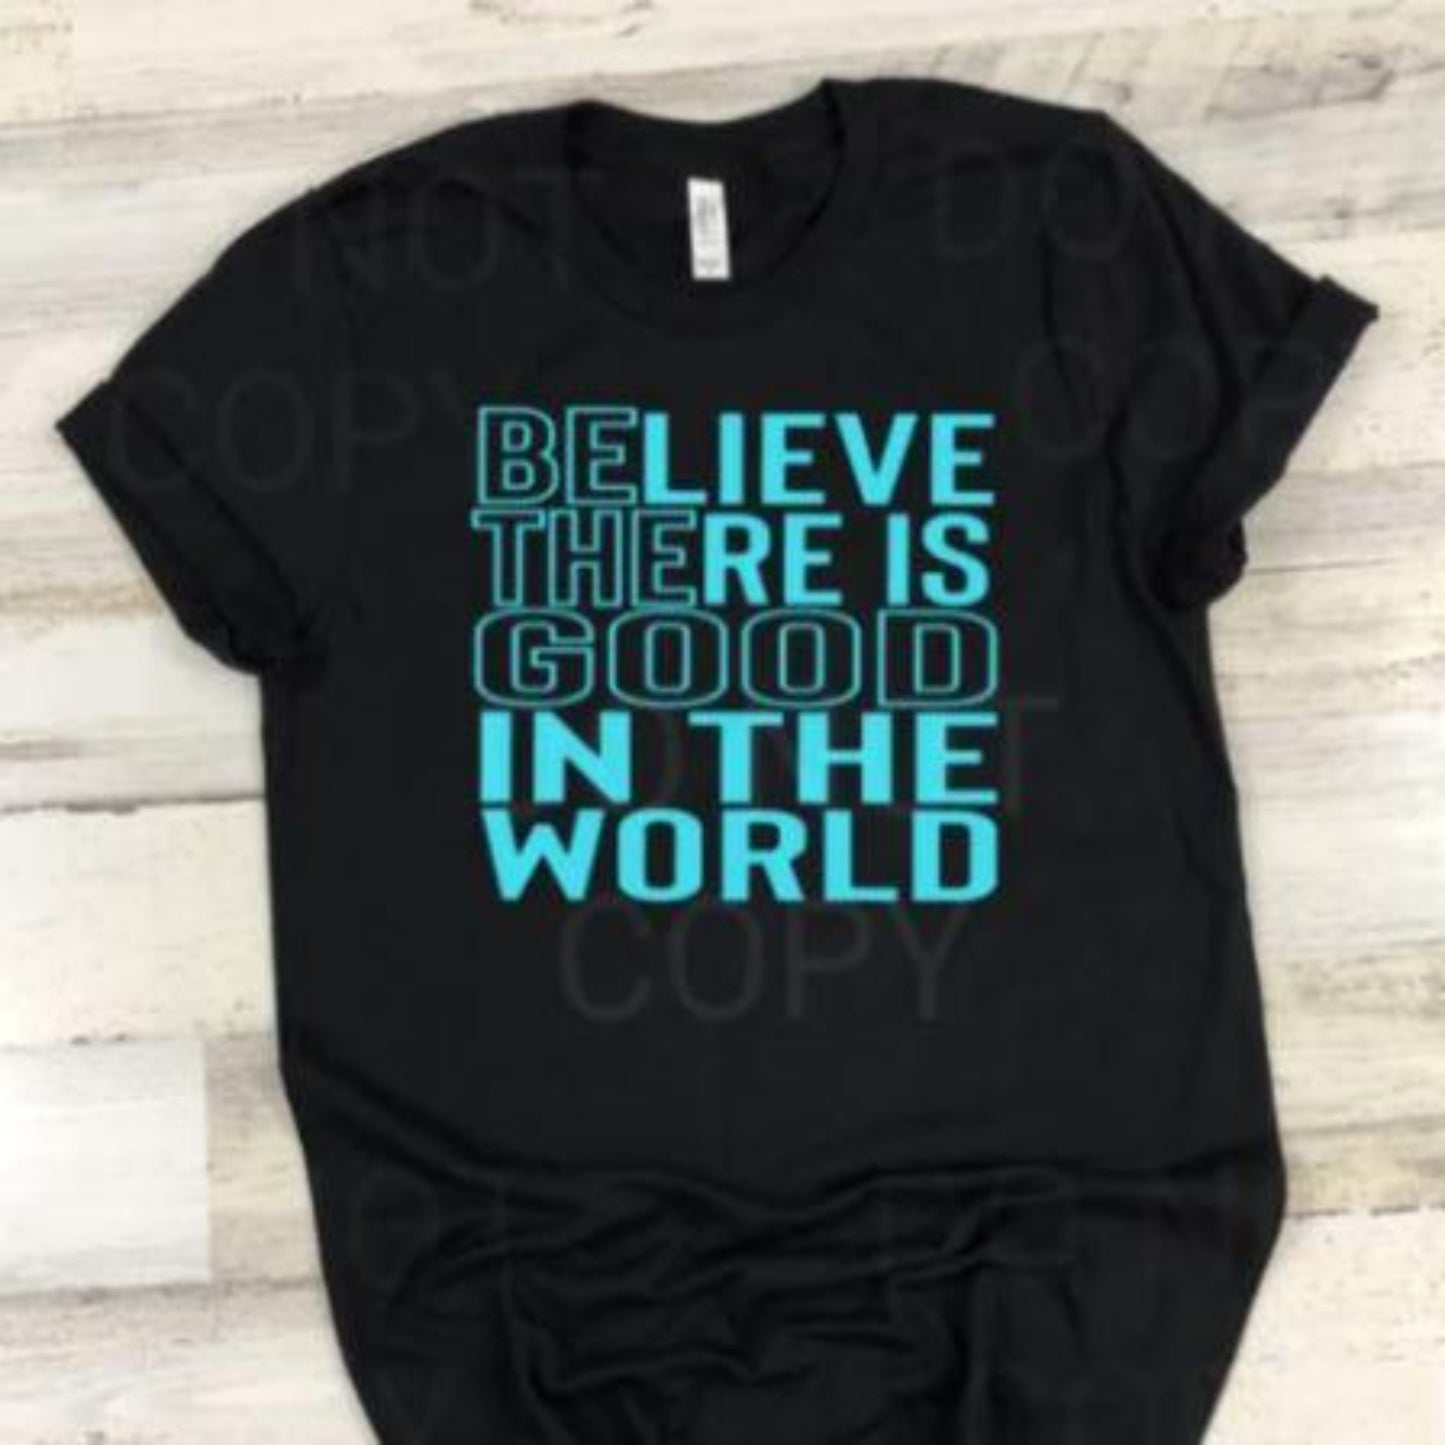 believe_there_is_good_in_the_world specialty tee  motivational shirt inspirational tshirt